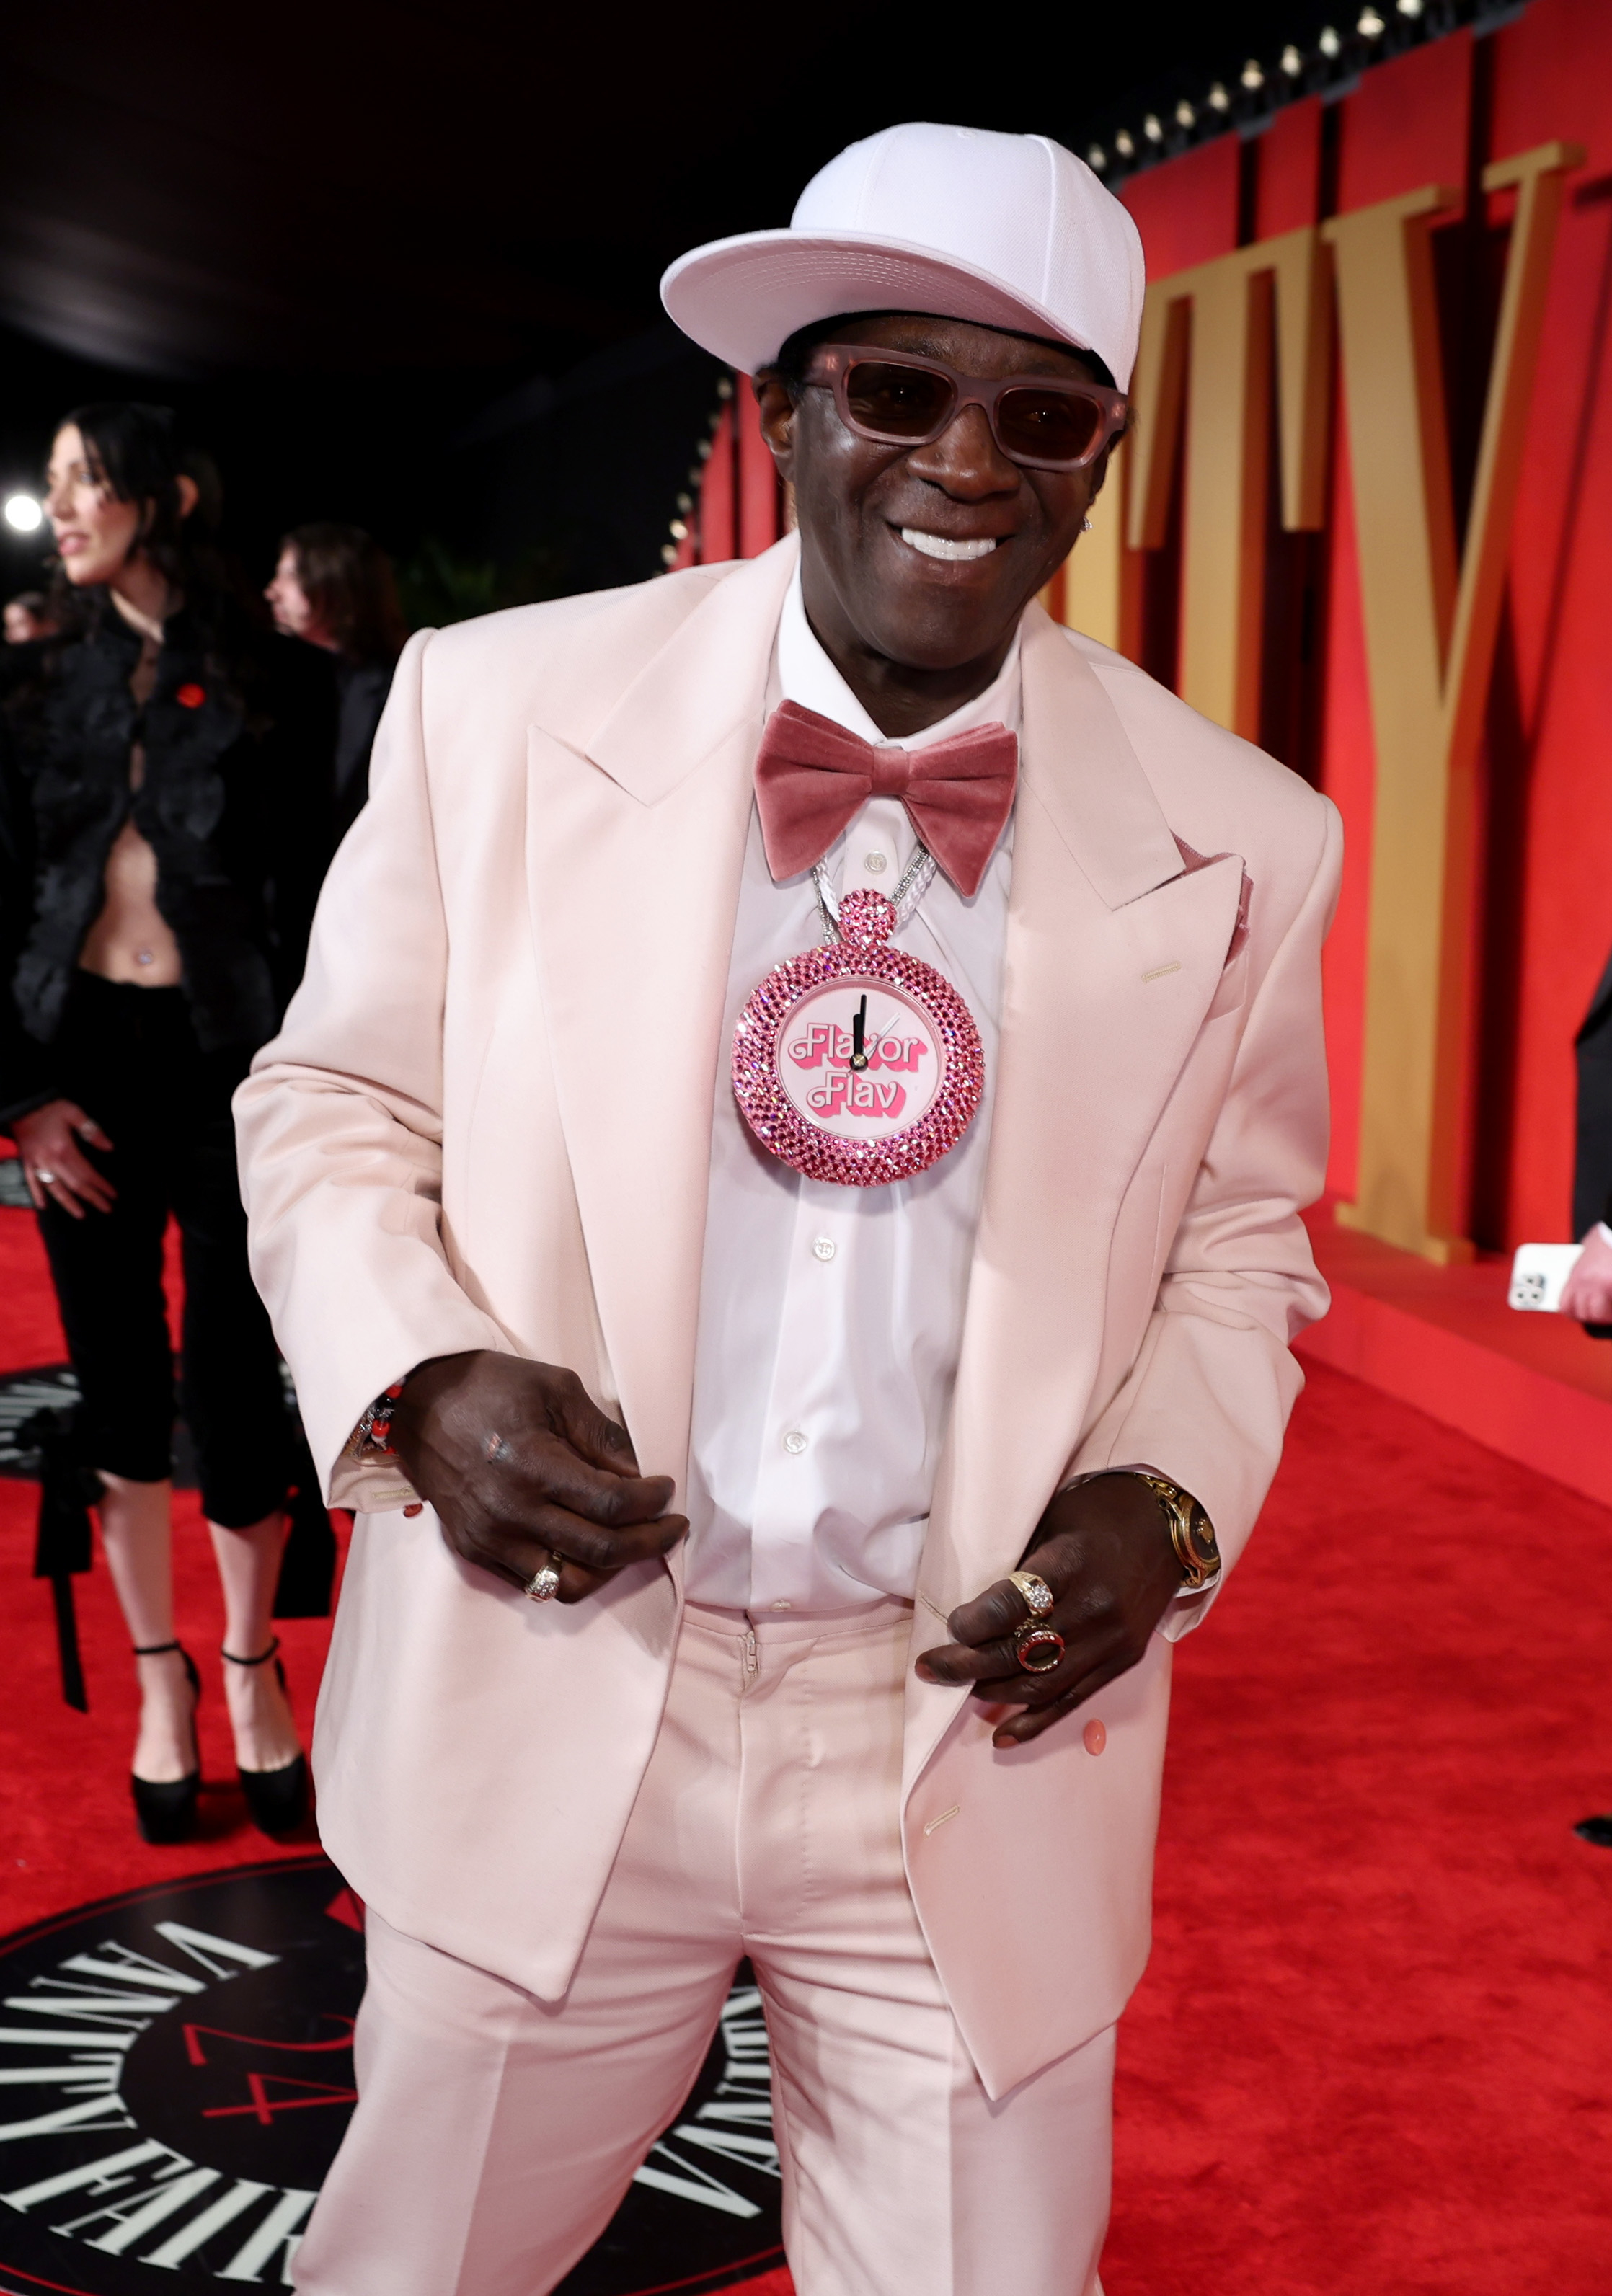 Flavor Flav in a light suit with a large clock necklace on a red carpet